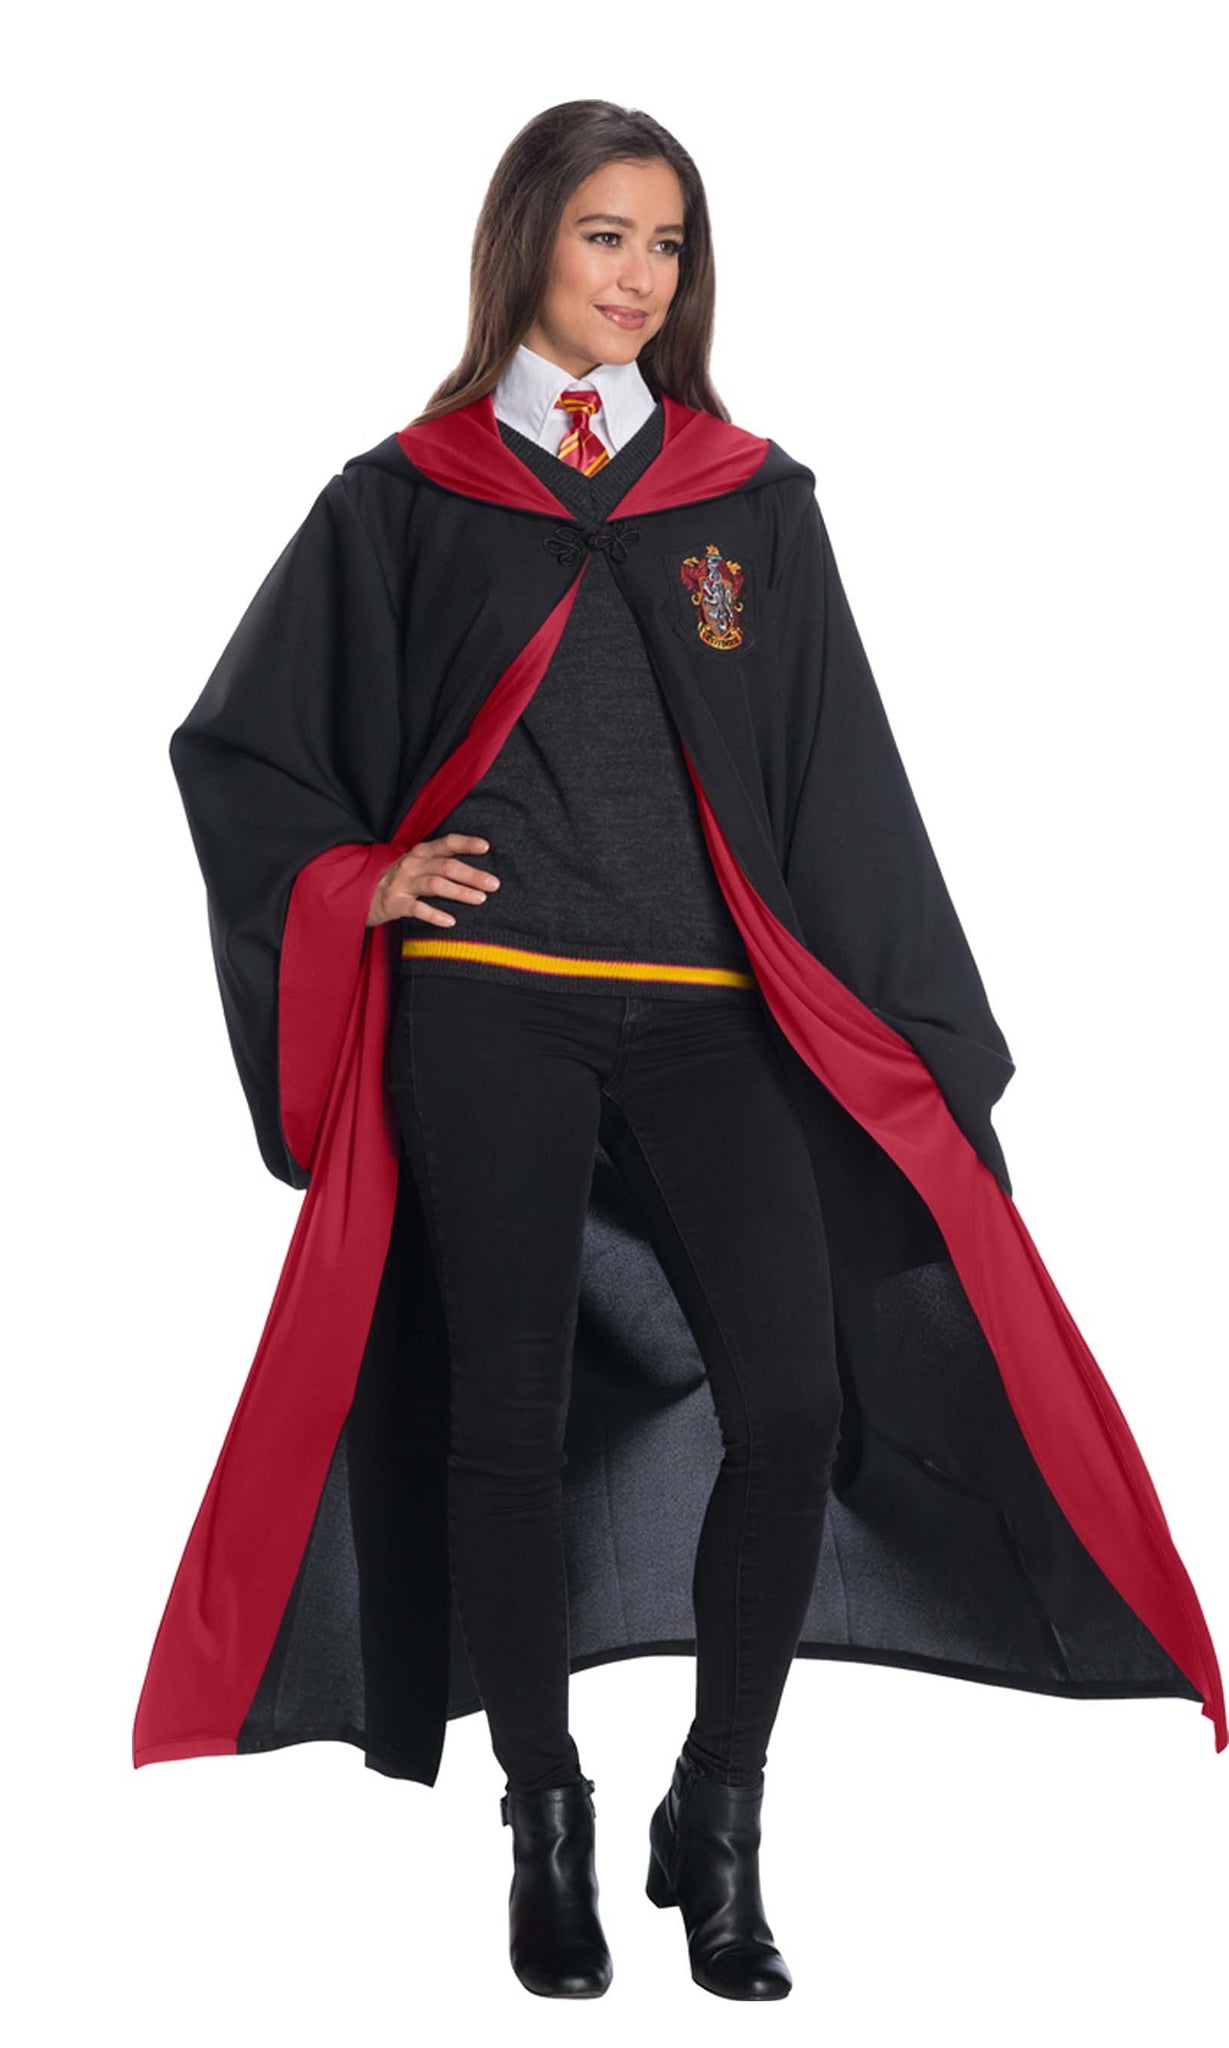 Woman in black and red Gryffindor robe, sweater and necktie